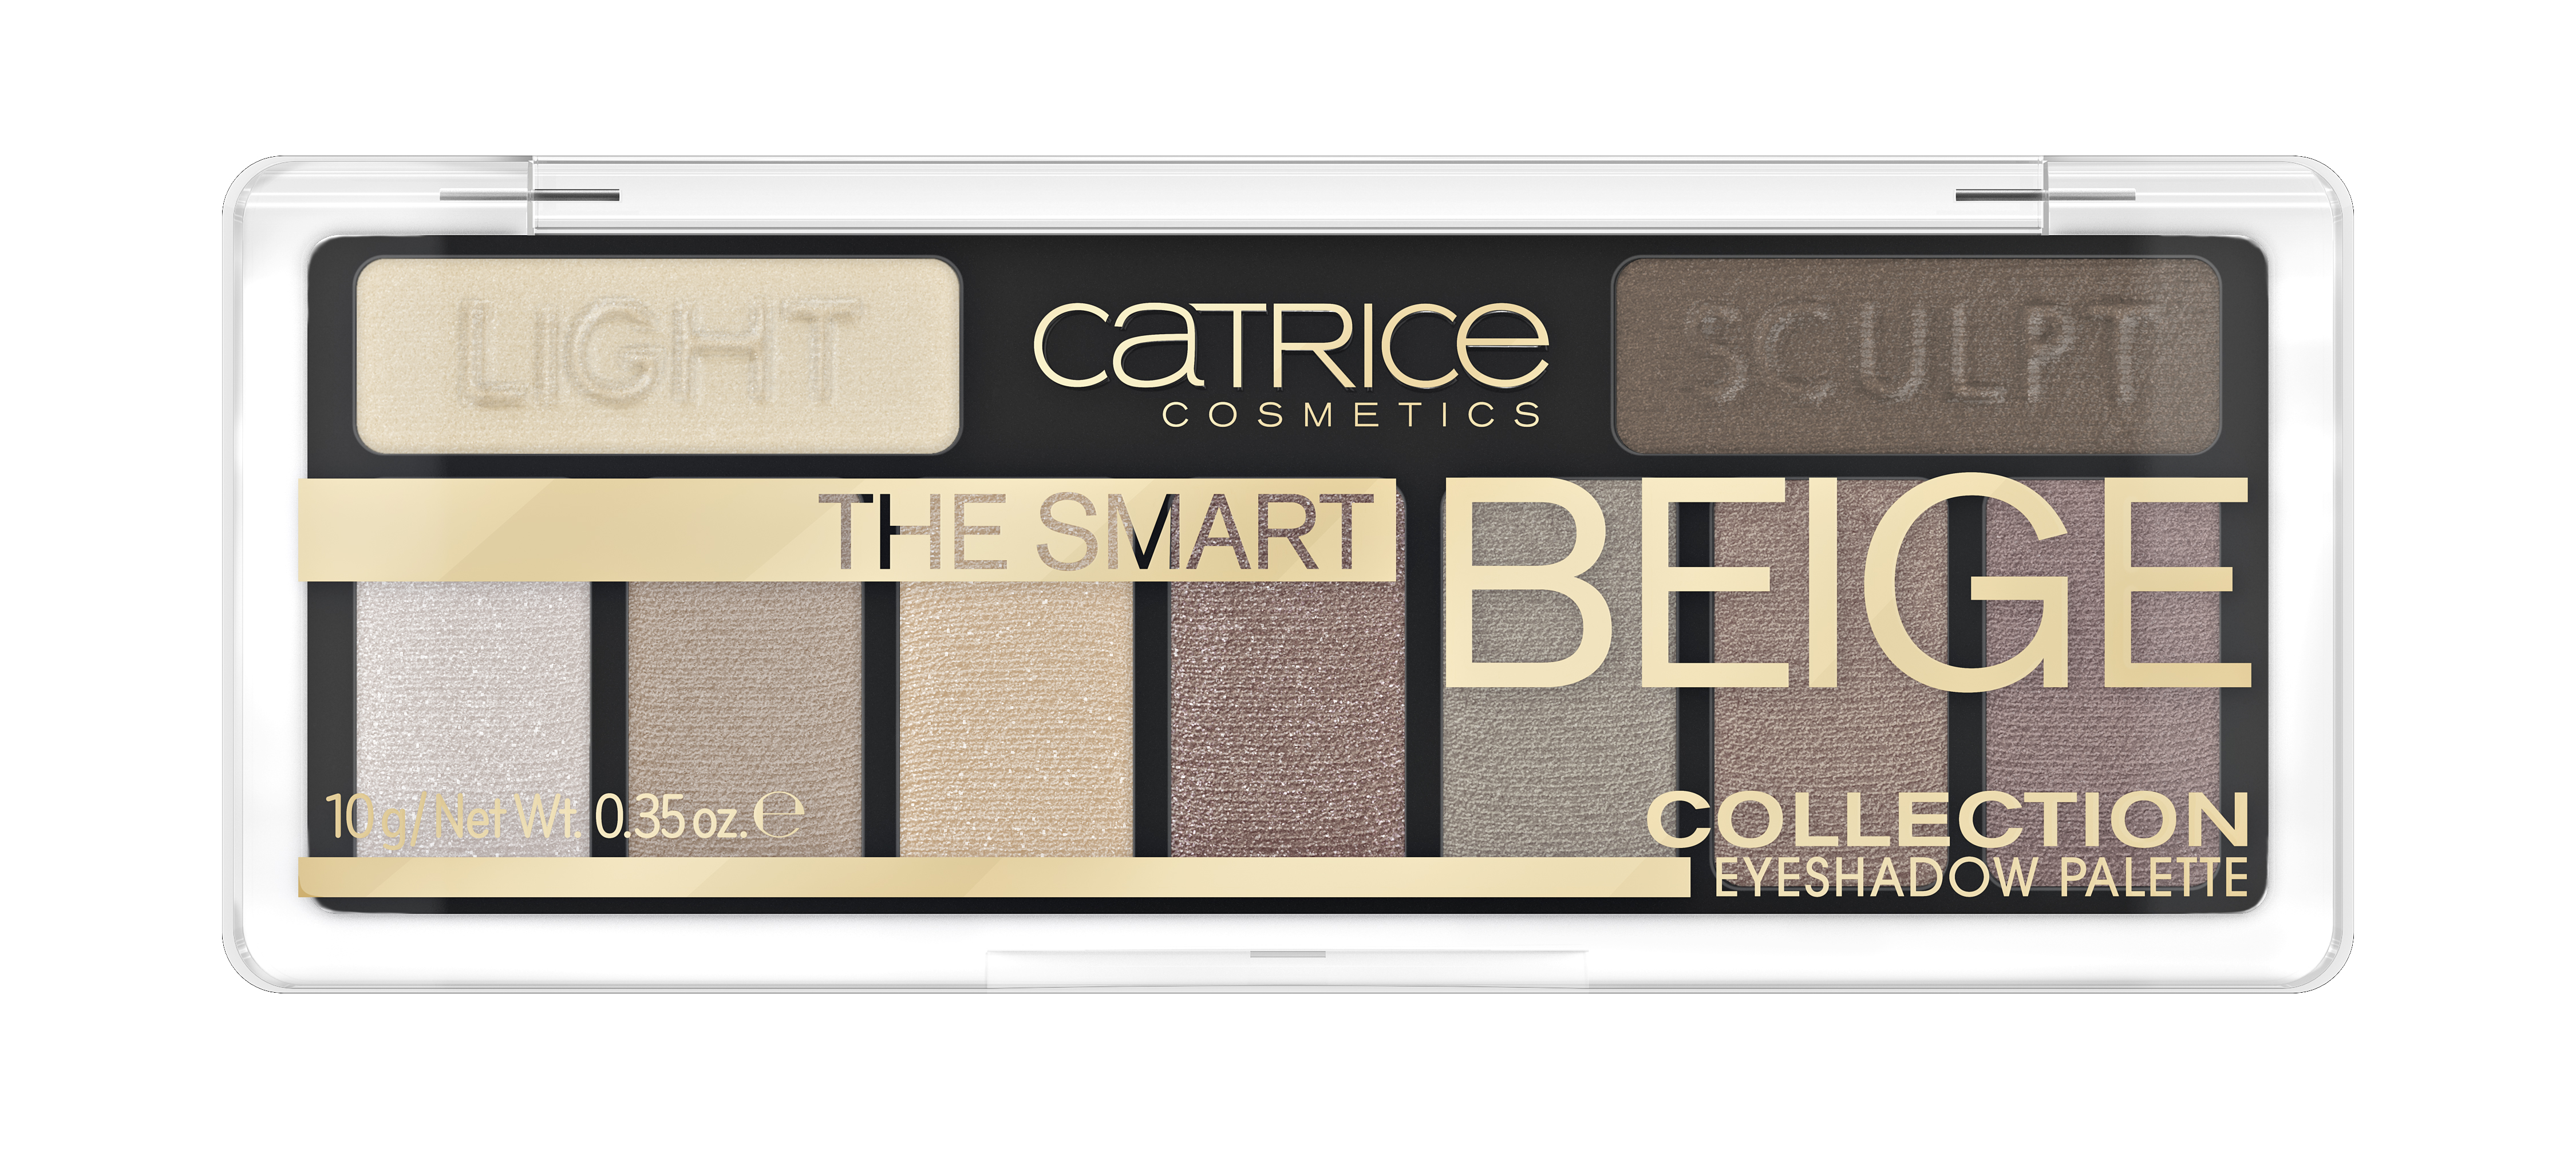 Catrice The Smart Beige Collection Eyeshadow Palette 010